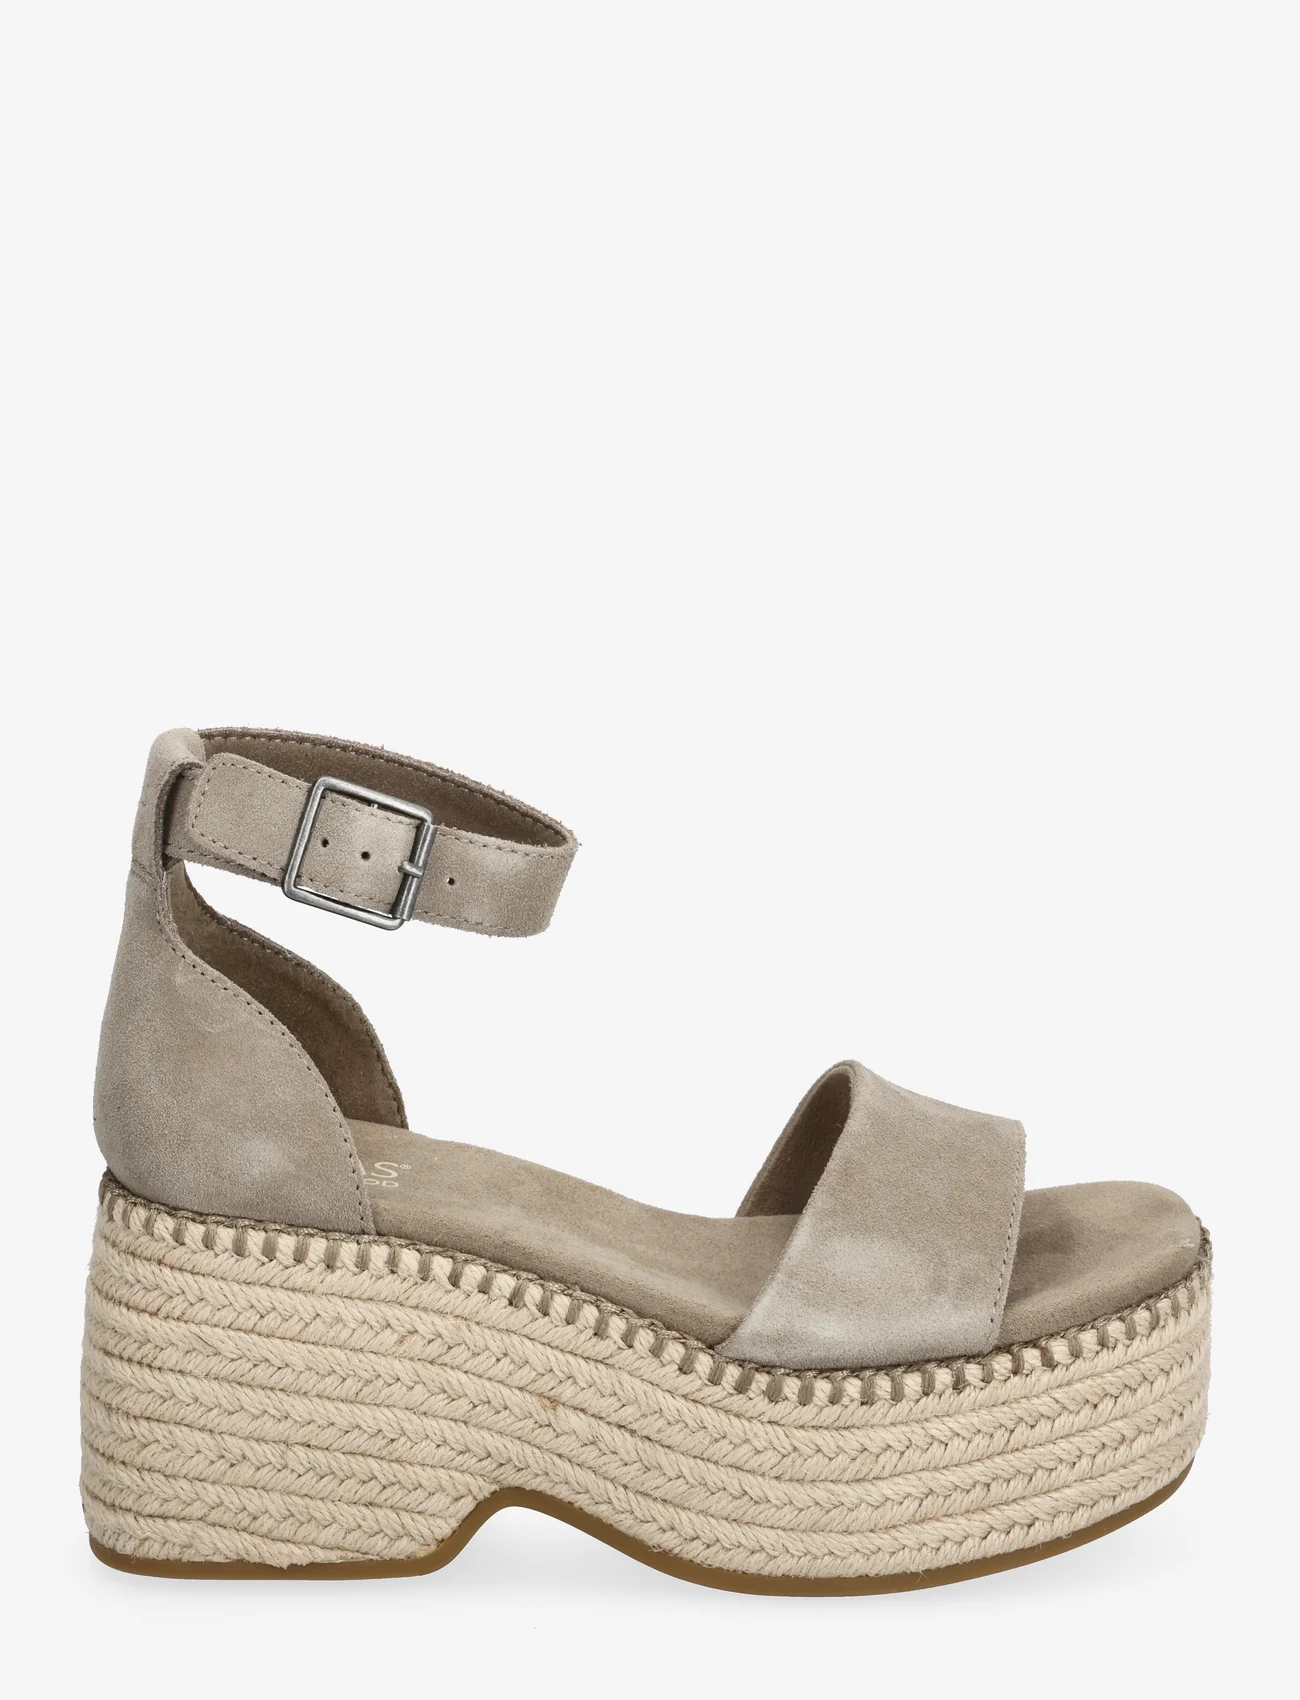 TOMS - Laila - peoriided outlet-hindadega - natural - 1